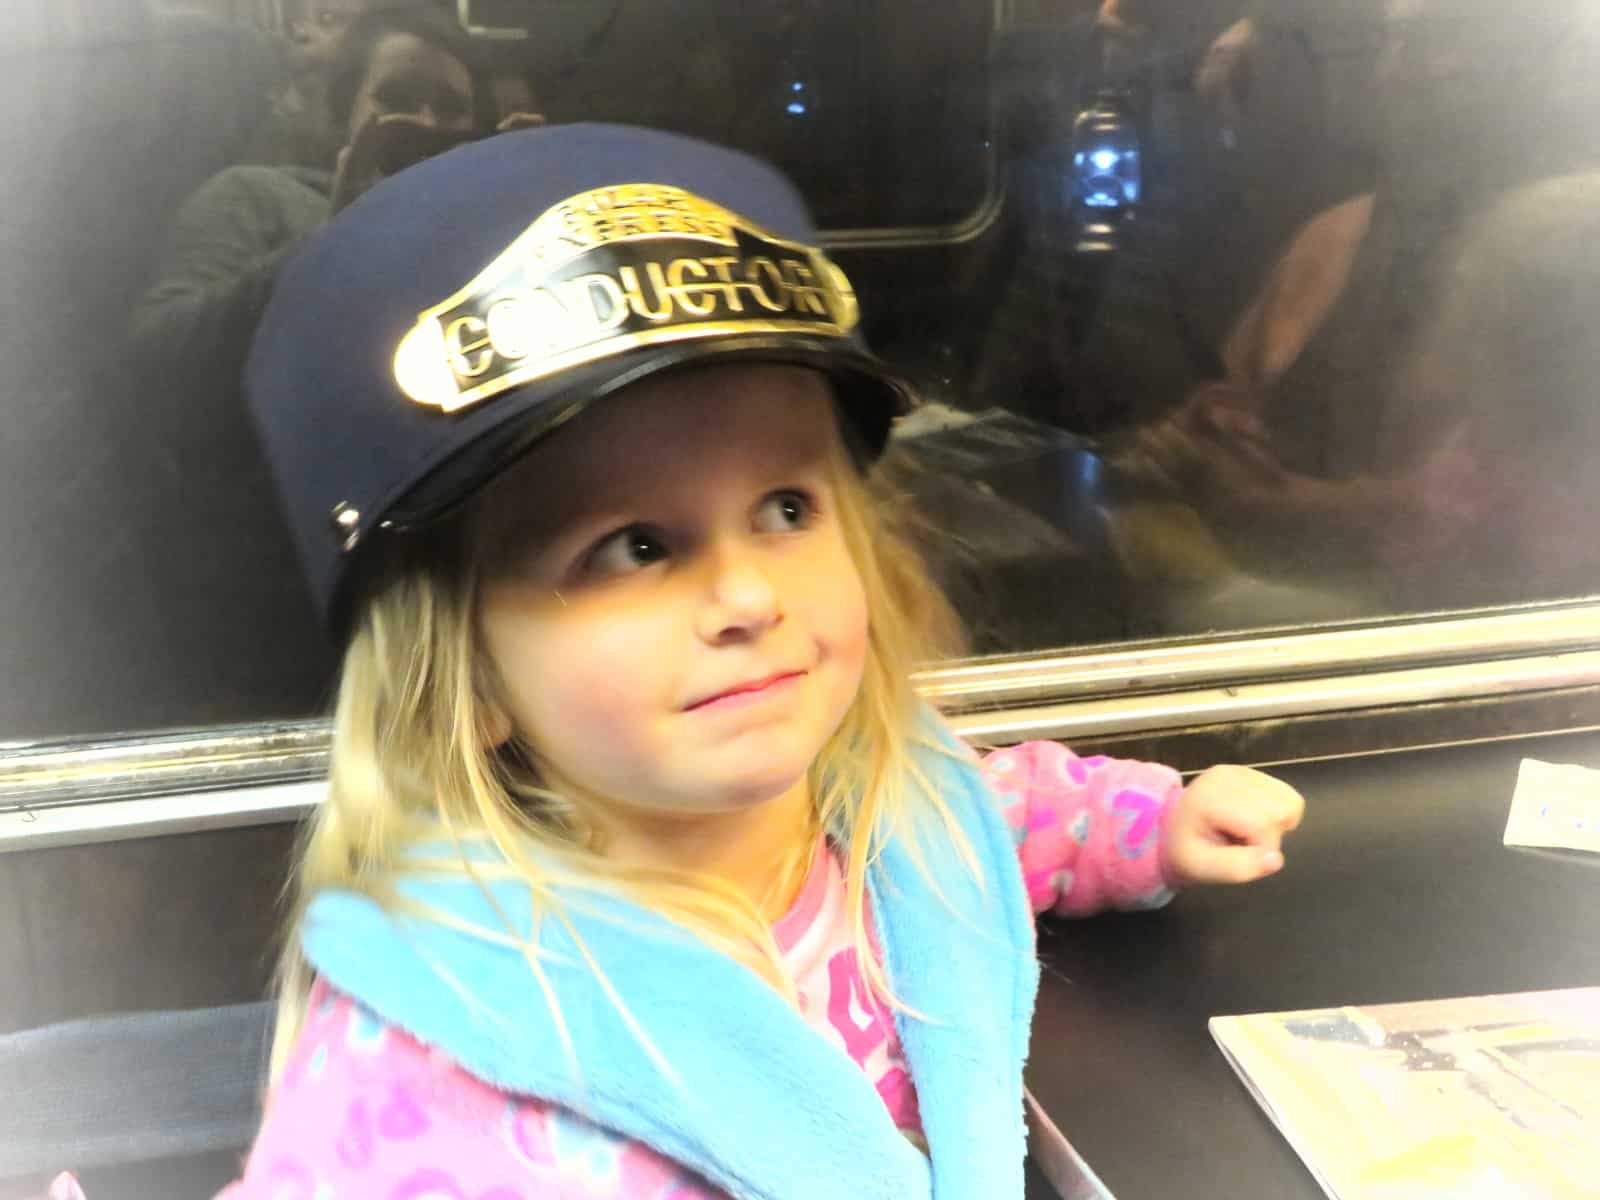 Little girl in a dressing gown wearing the polar express conductor's hat